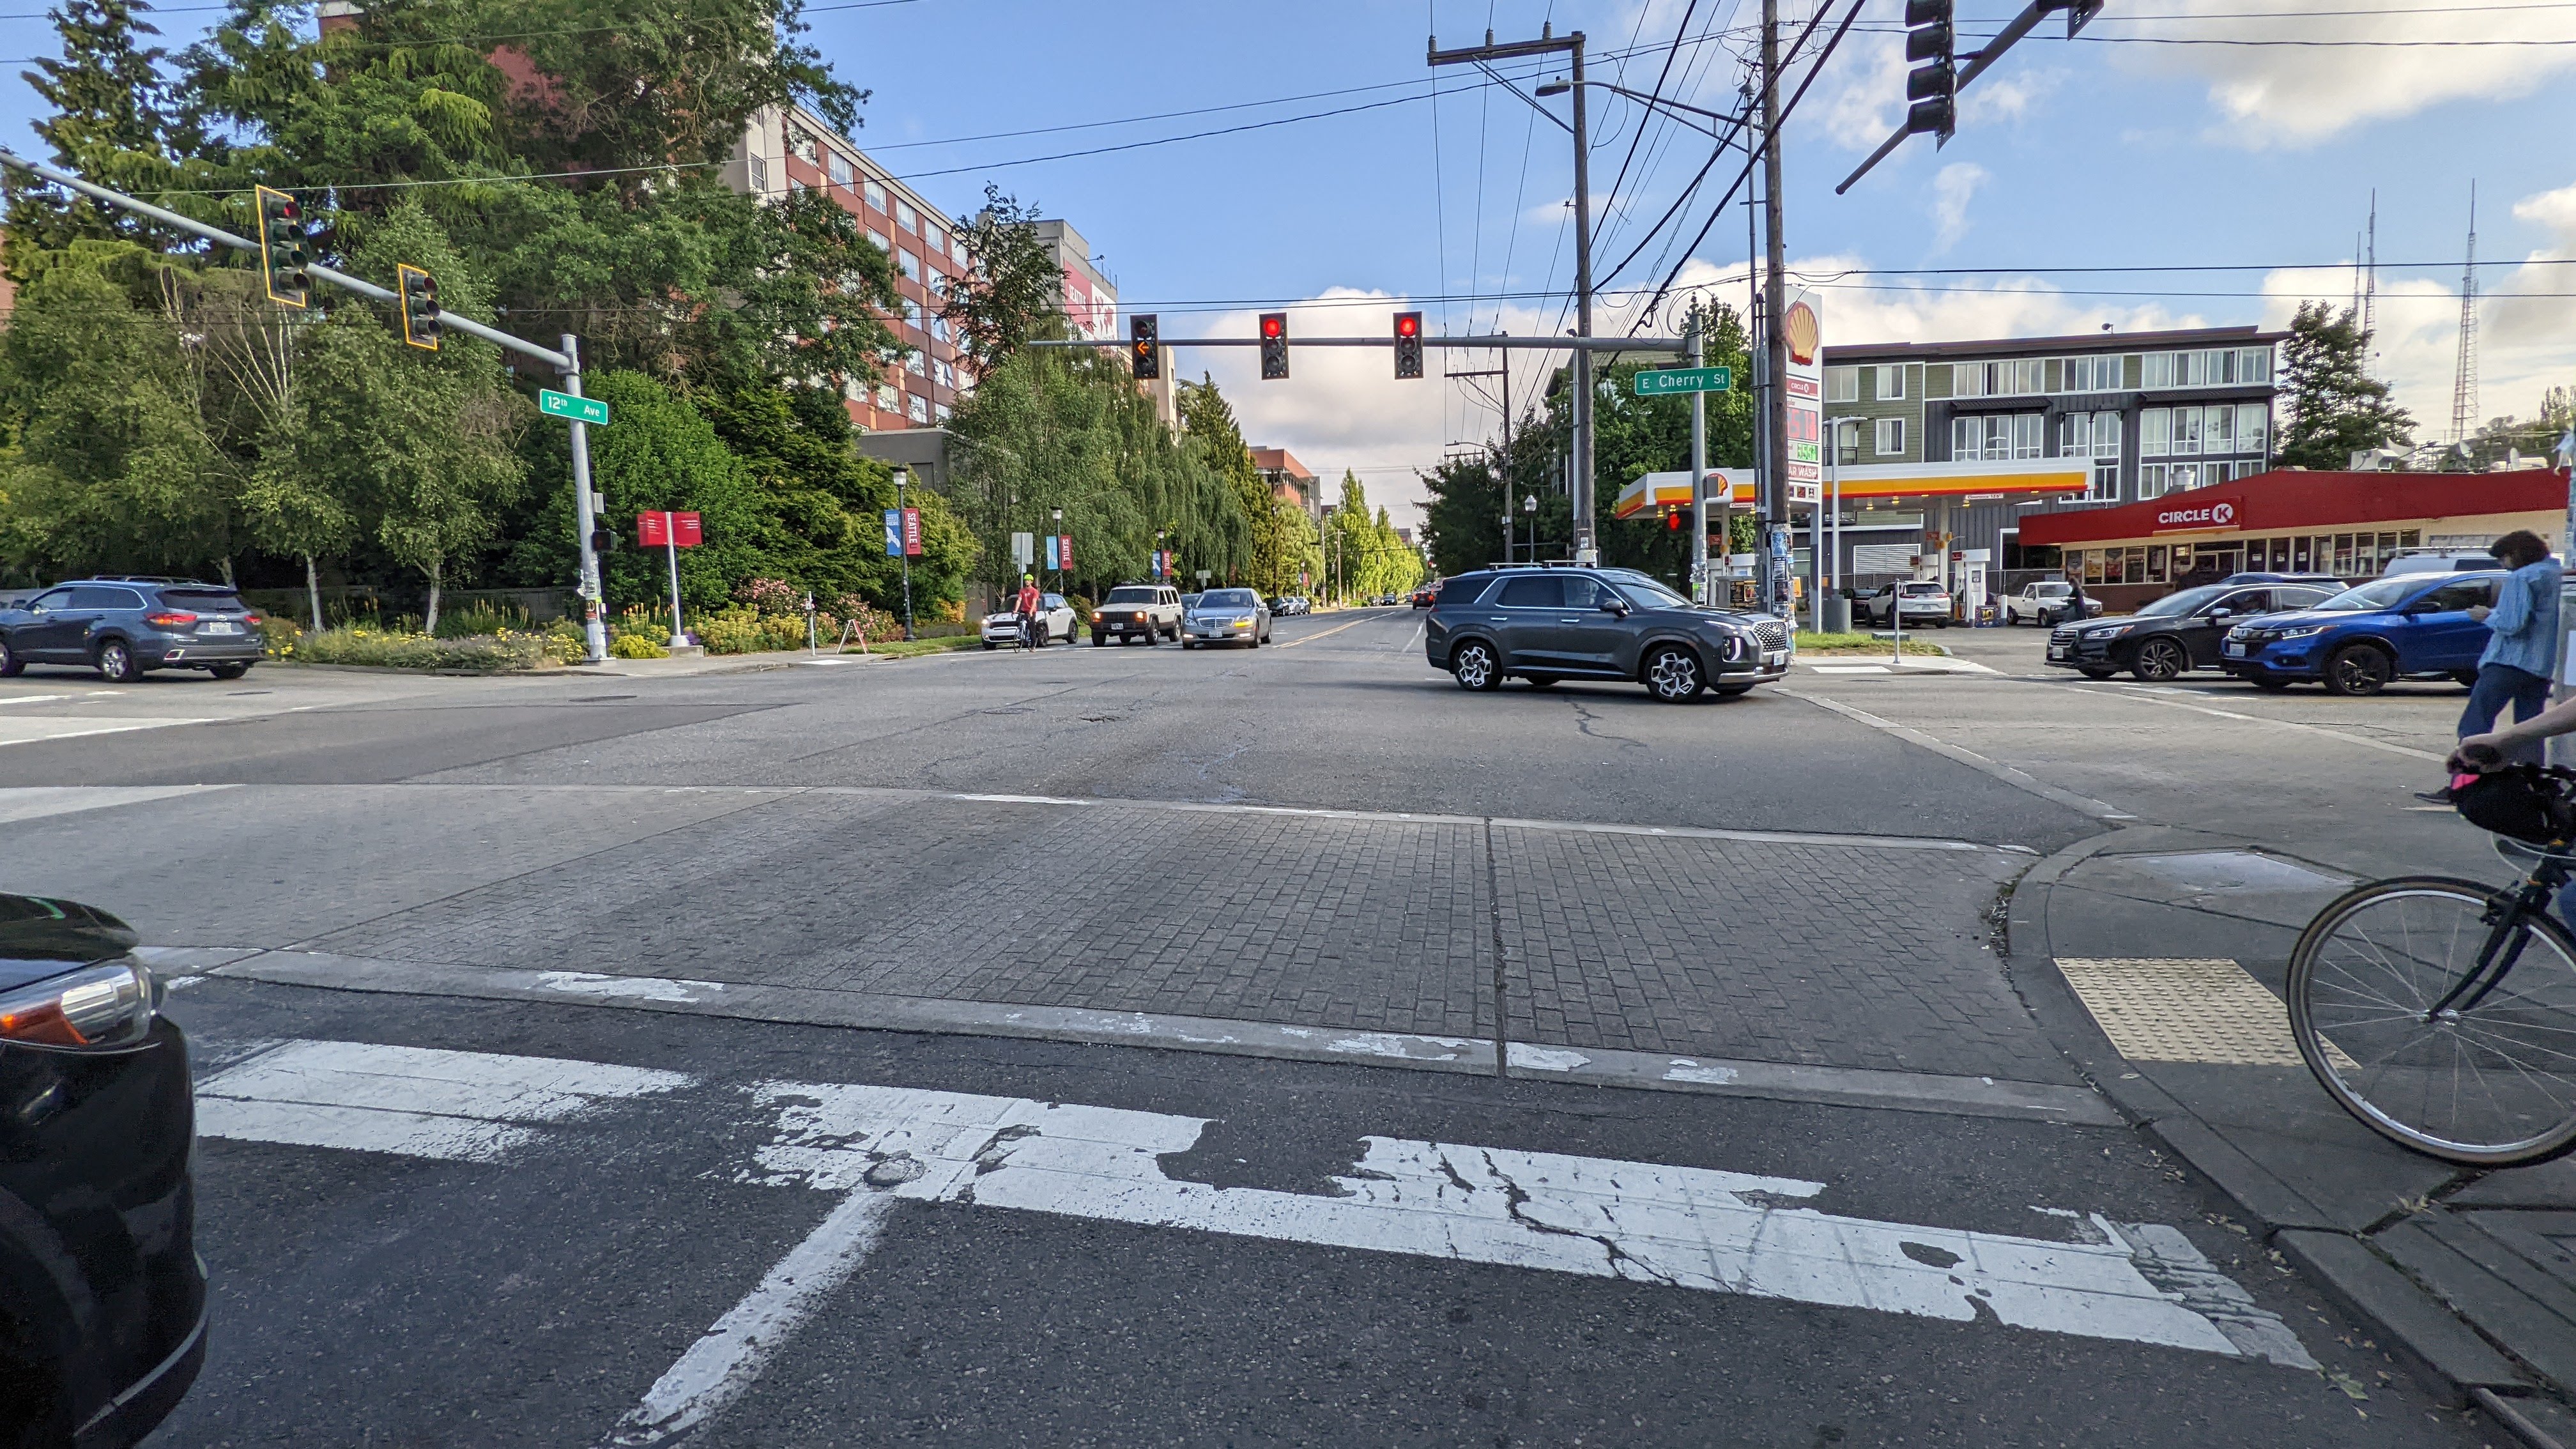 Image shows 12th Ave and Cherry St intersection